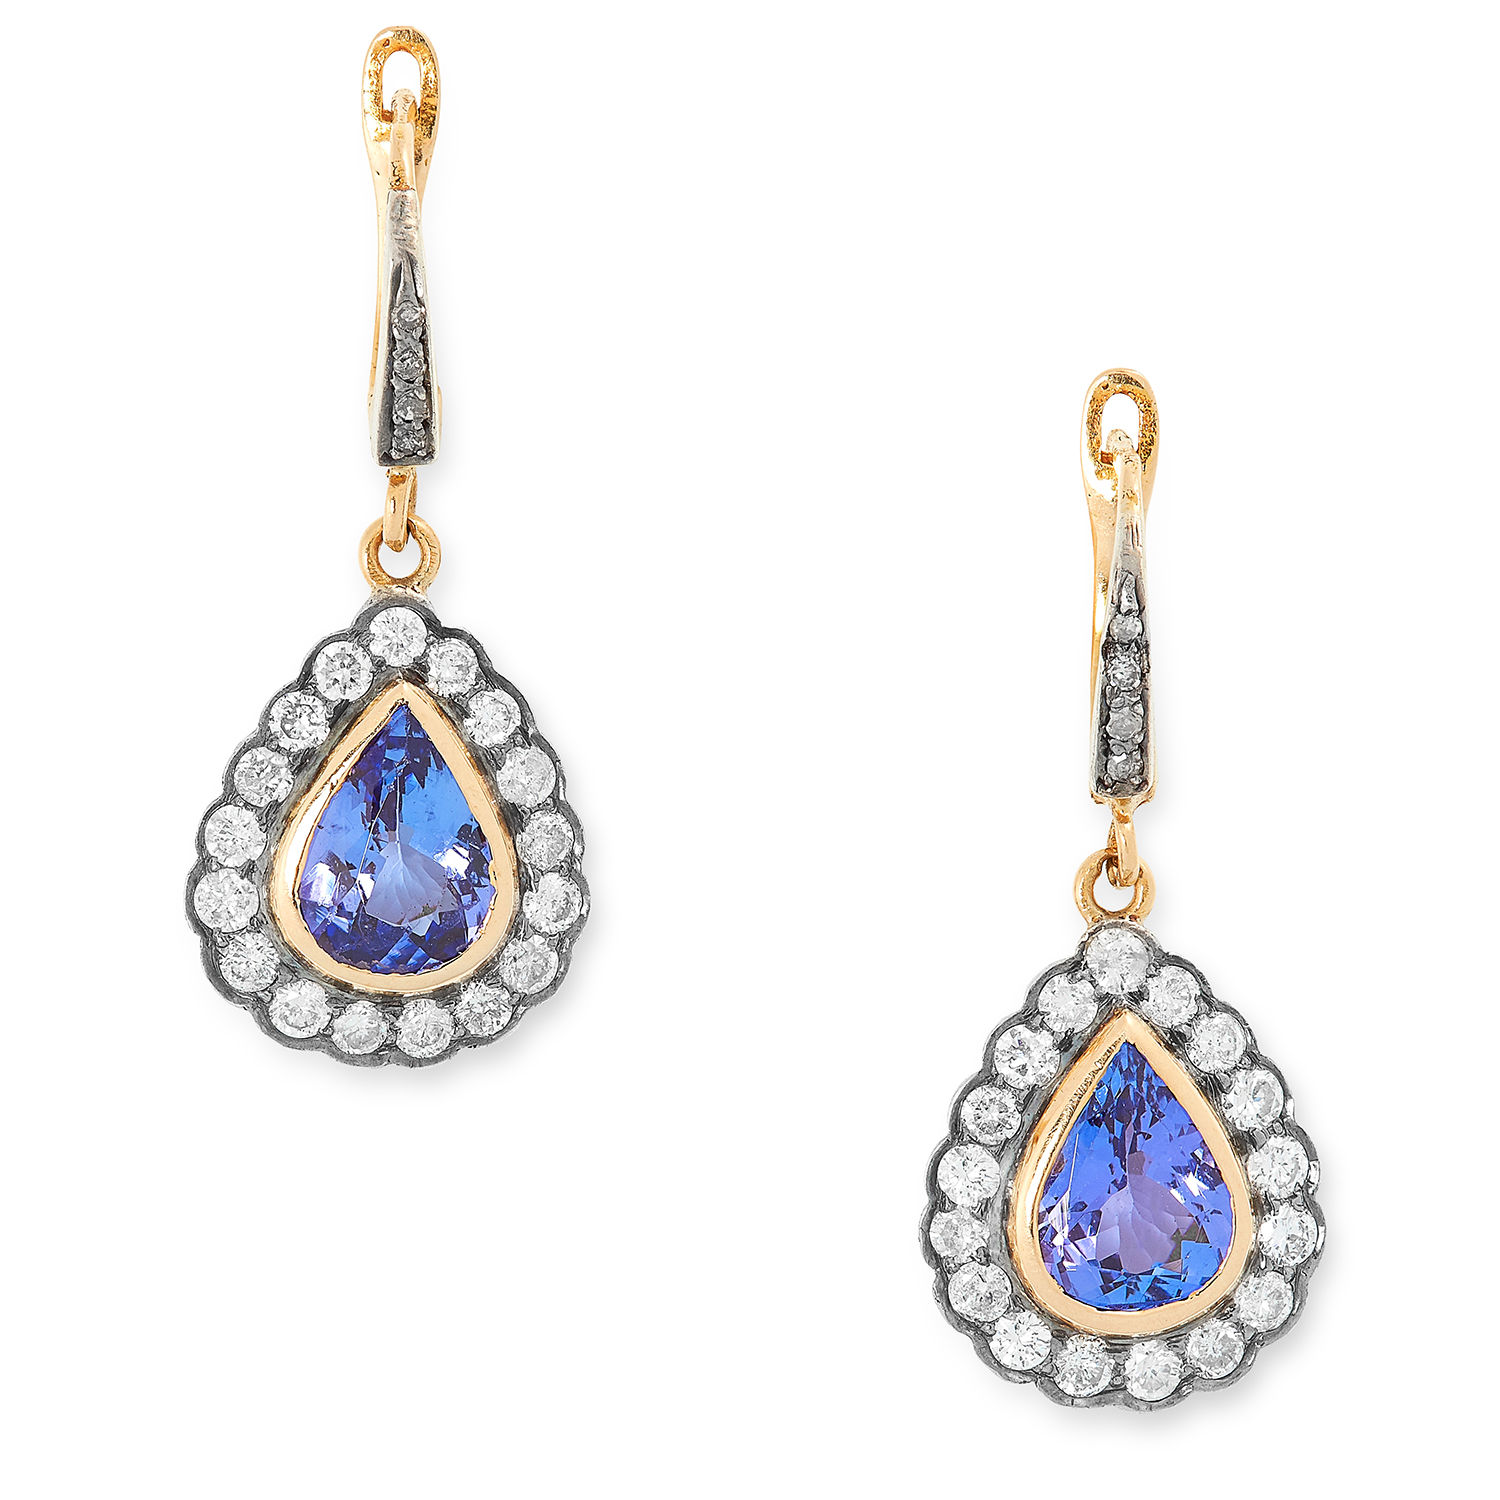 A PAIR OF TANZANITE AND DIAMOND CLUSTER EARRINGS each set with a pear cut tanzanite in a cluster